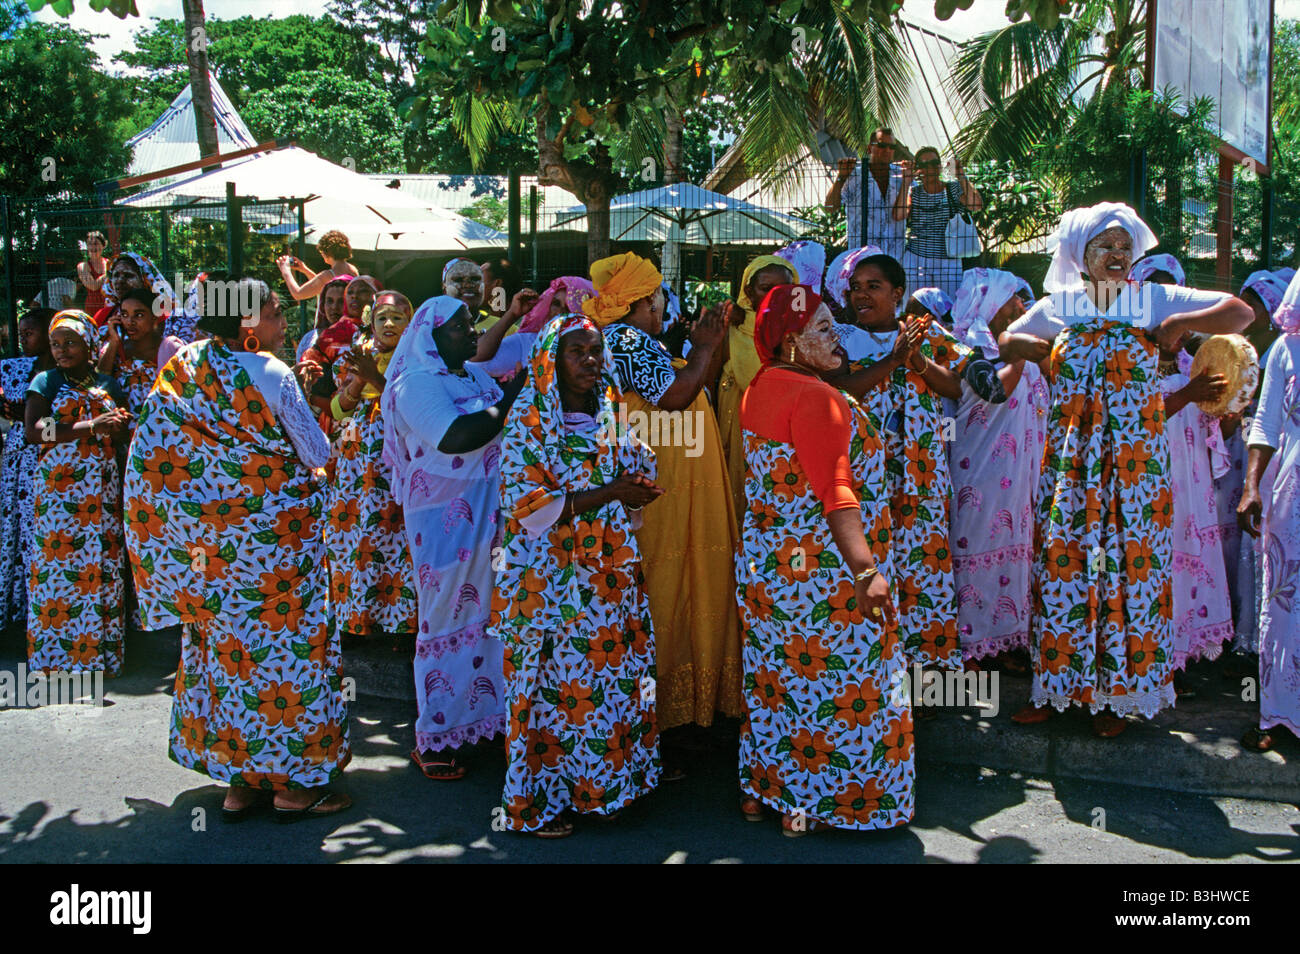 Villagers on Grande Terre island, Mayotte islands, Comoro Archipelago Indian Ocean celebrating their return from the Hajj Mecca Stock Photo